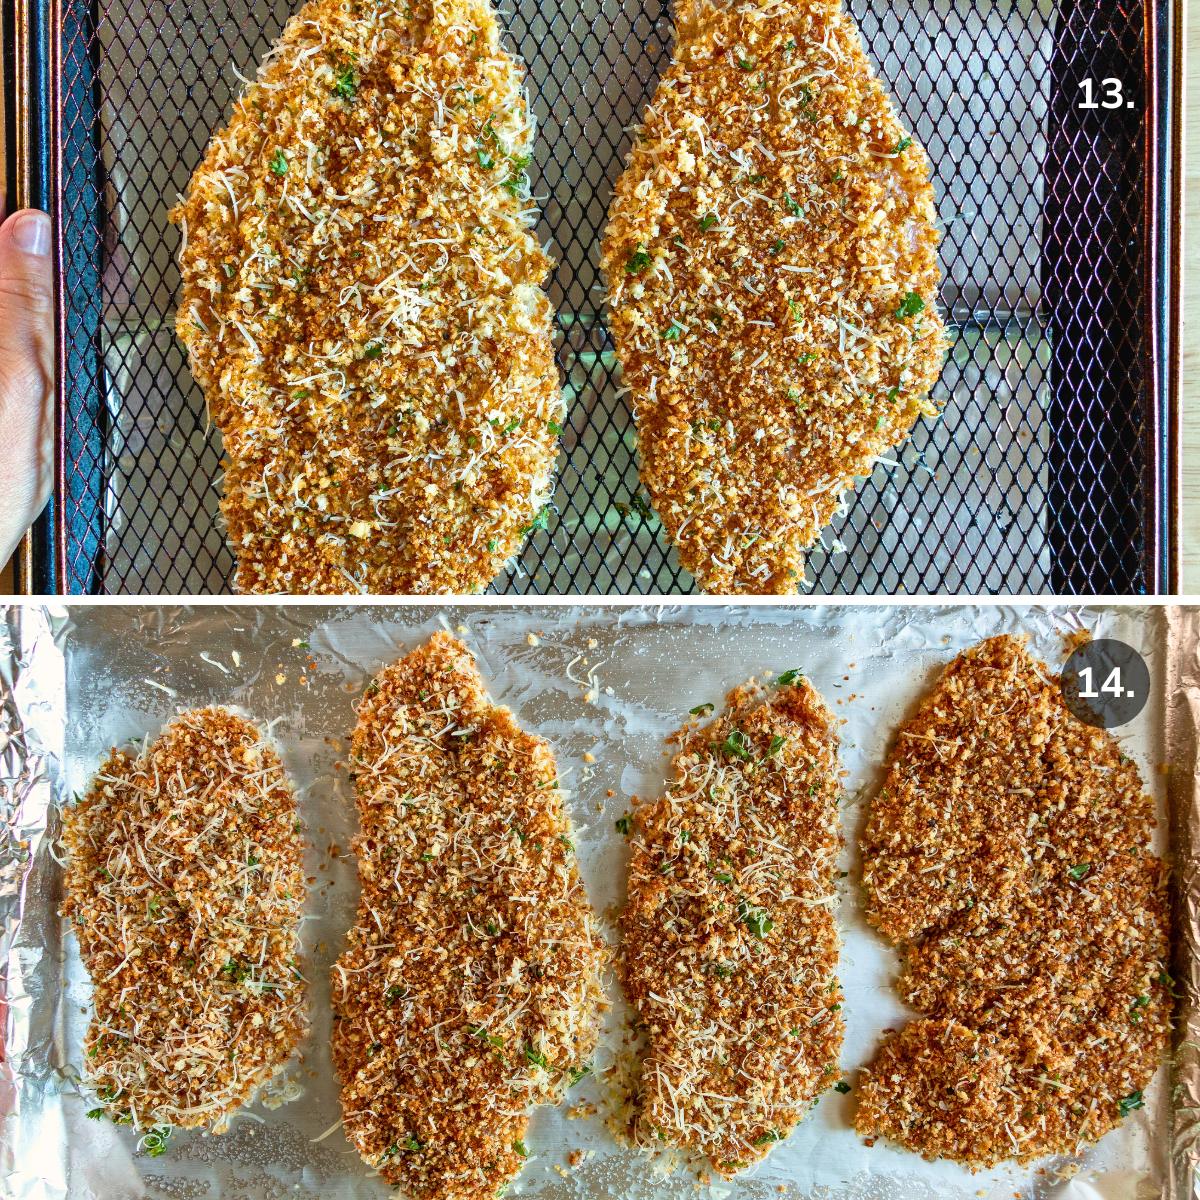 Top photo is the chicken cutlets in an air fryer basket and the bottom photo is chicken on a baking sheet ready for the oven. 